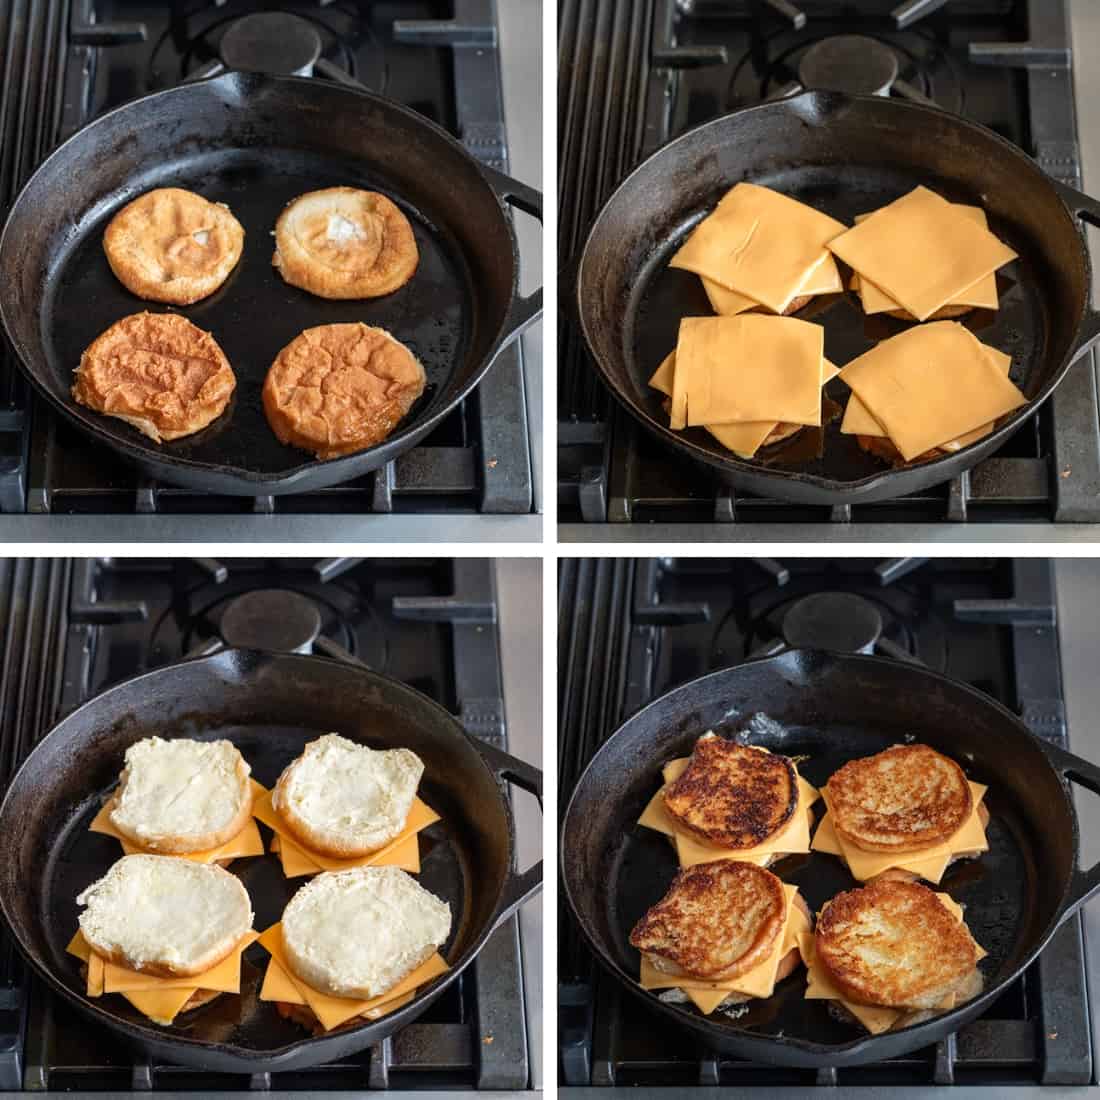 Making a grilled Cheese Bun in a skillet to make Grilled Cheese Burgers.